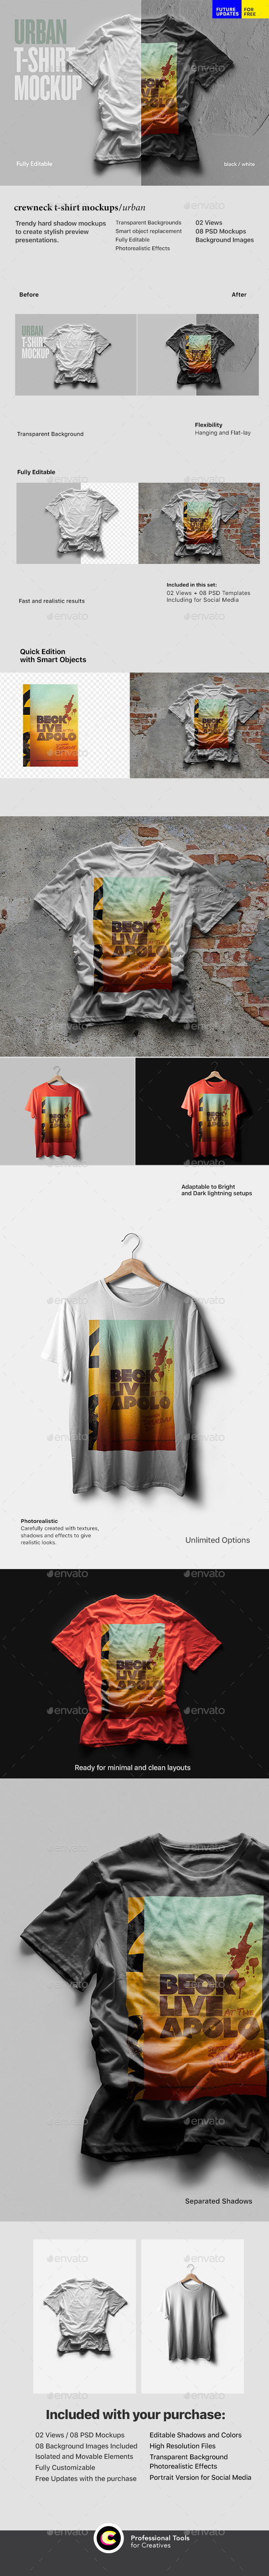 Urban T Shirt Mockup By Itscroma Graphicriver